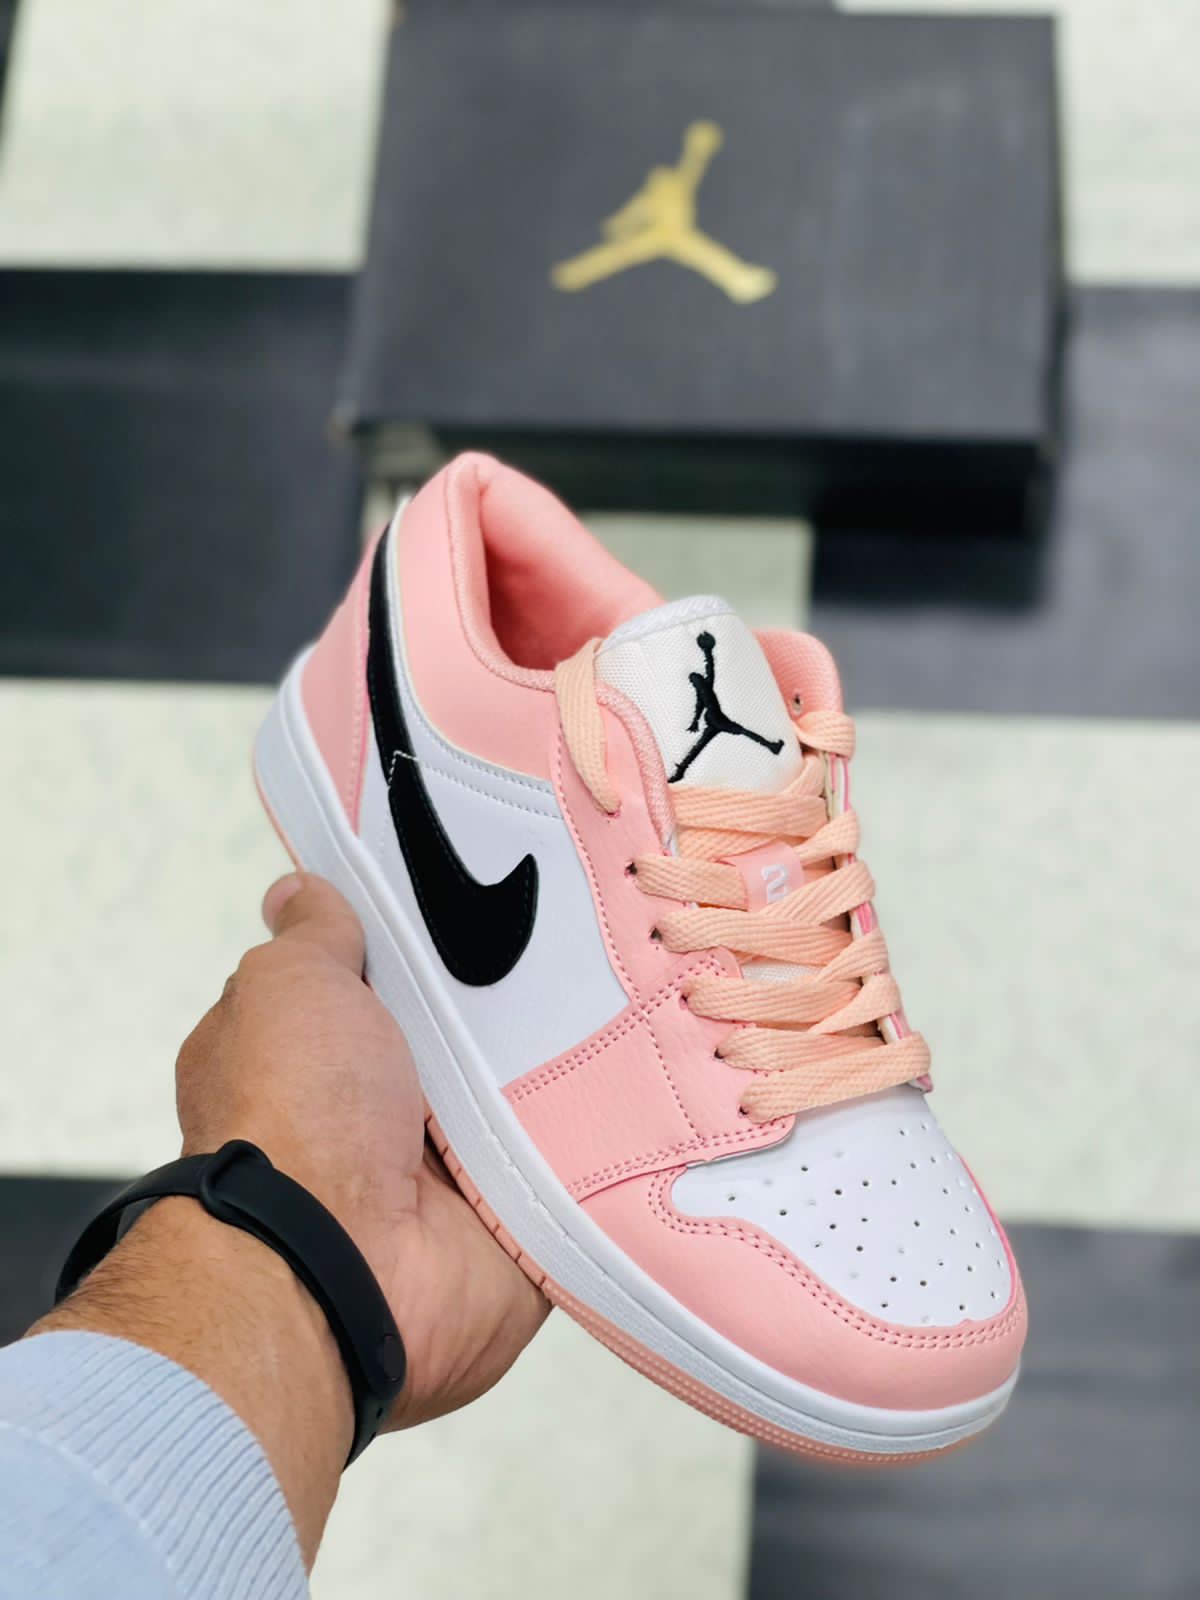 Low Arctic Pink Sneaker For Girls In Stock